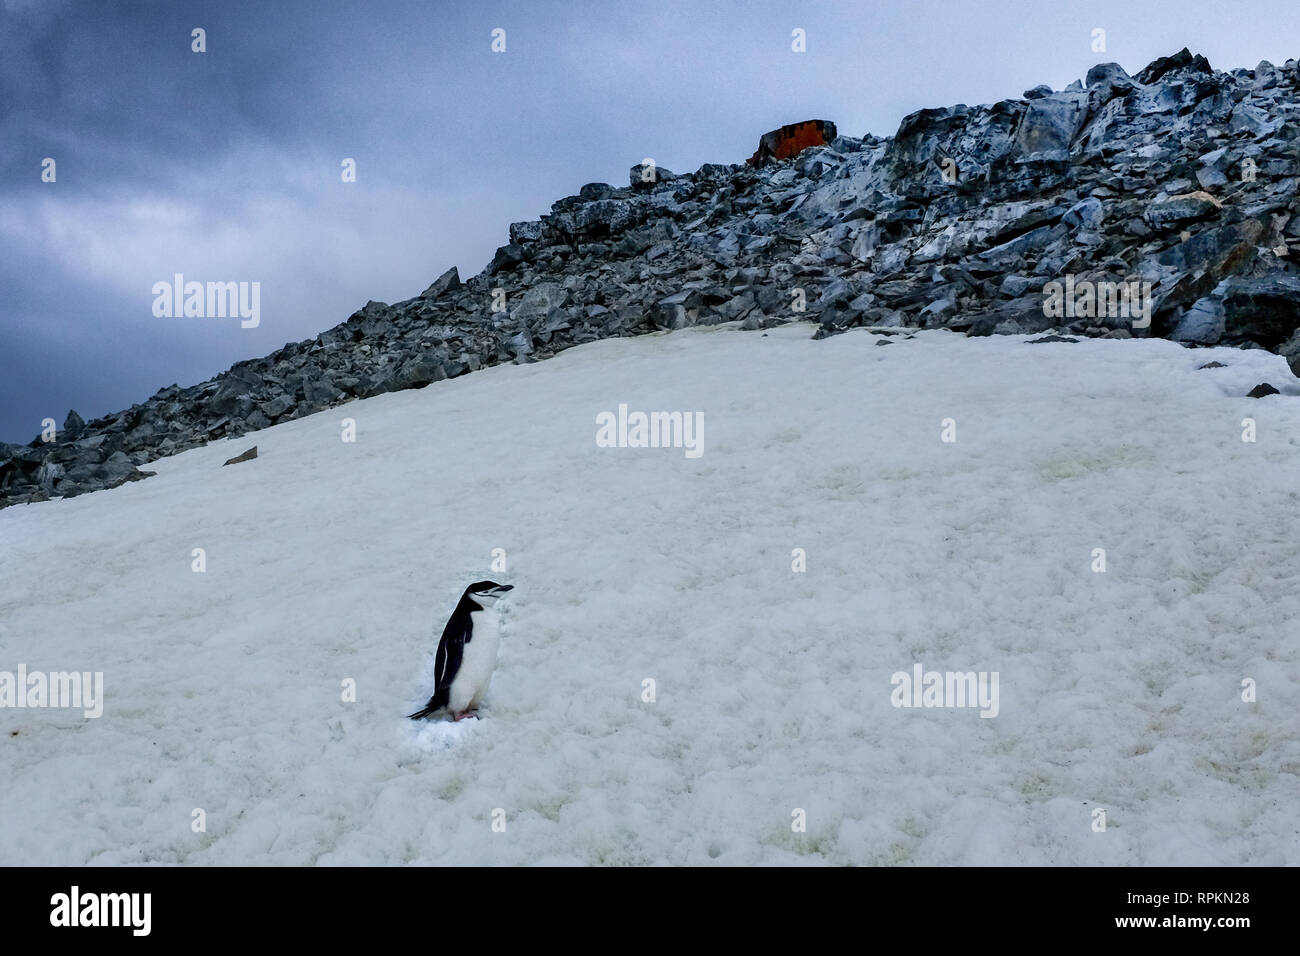 Scene of icebergs, penguins, seals, snow and ice in Antarctica, world's southernmost continent Stock Photo